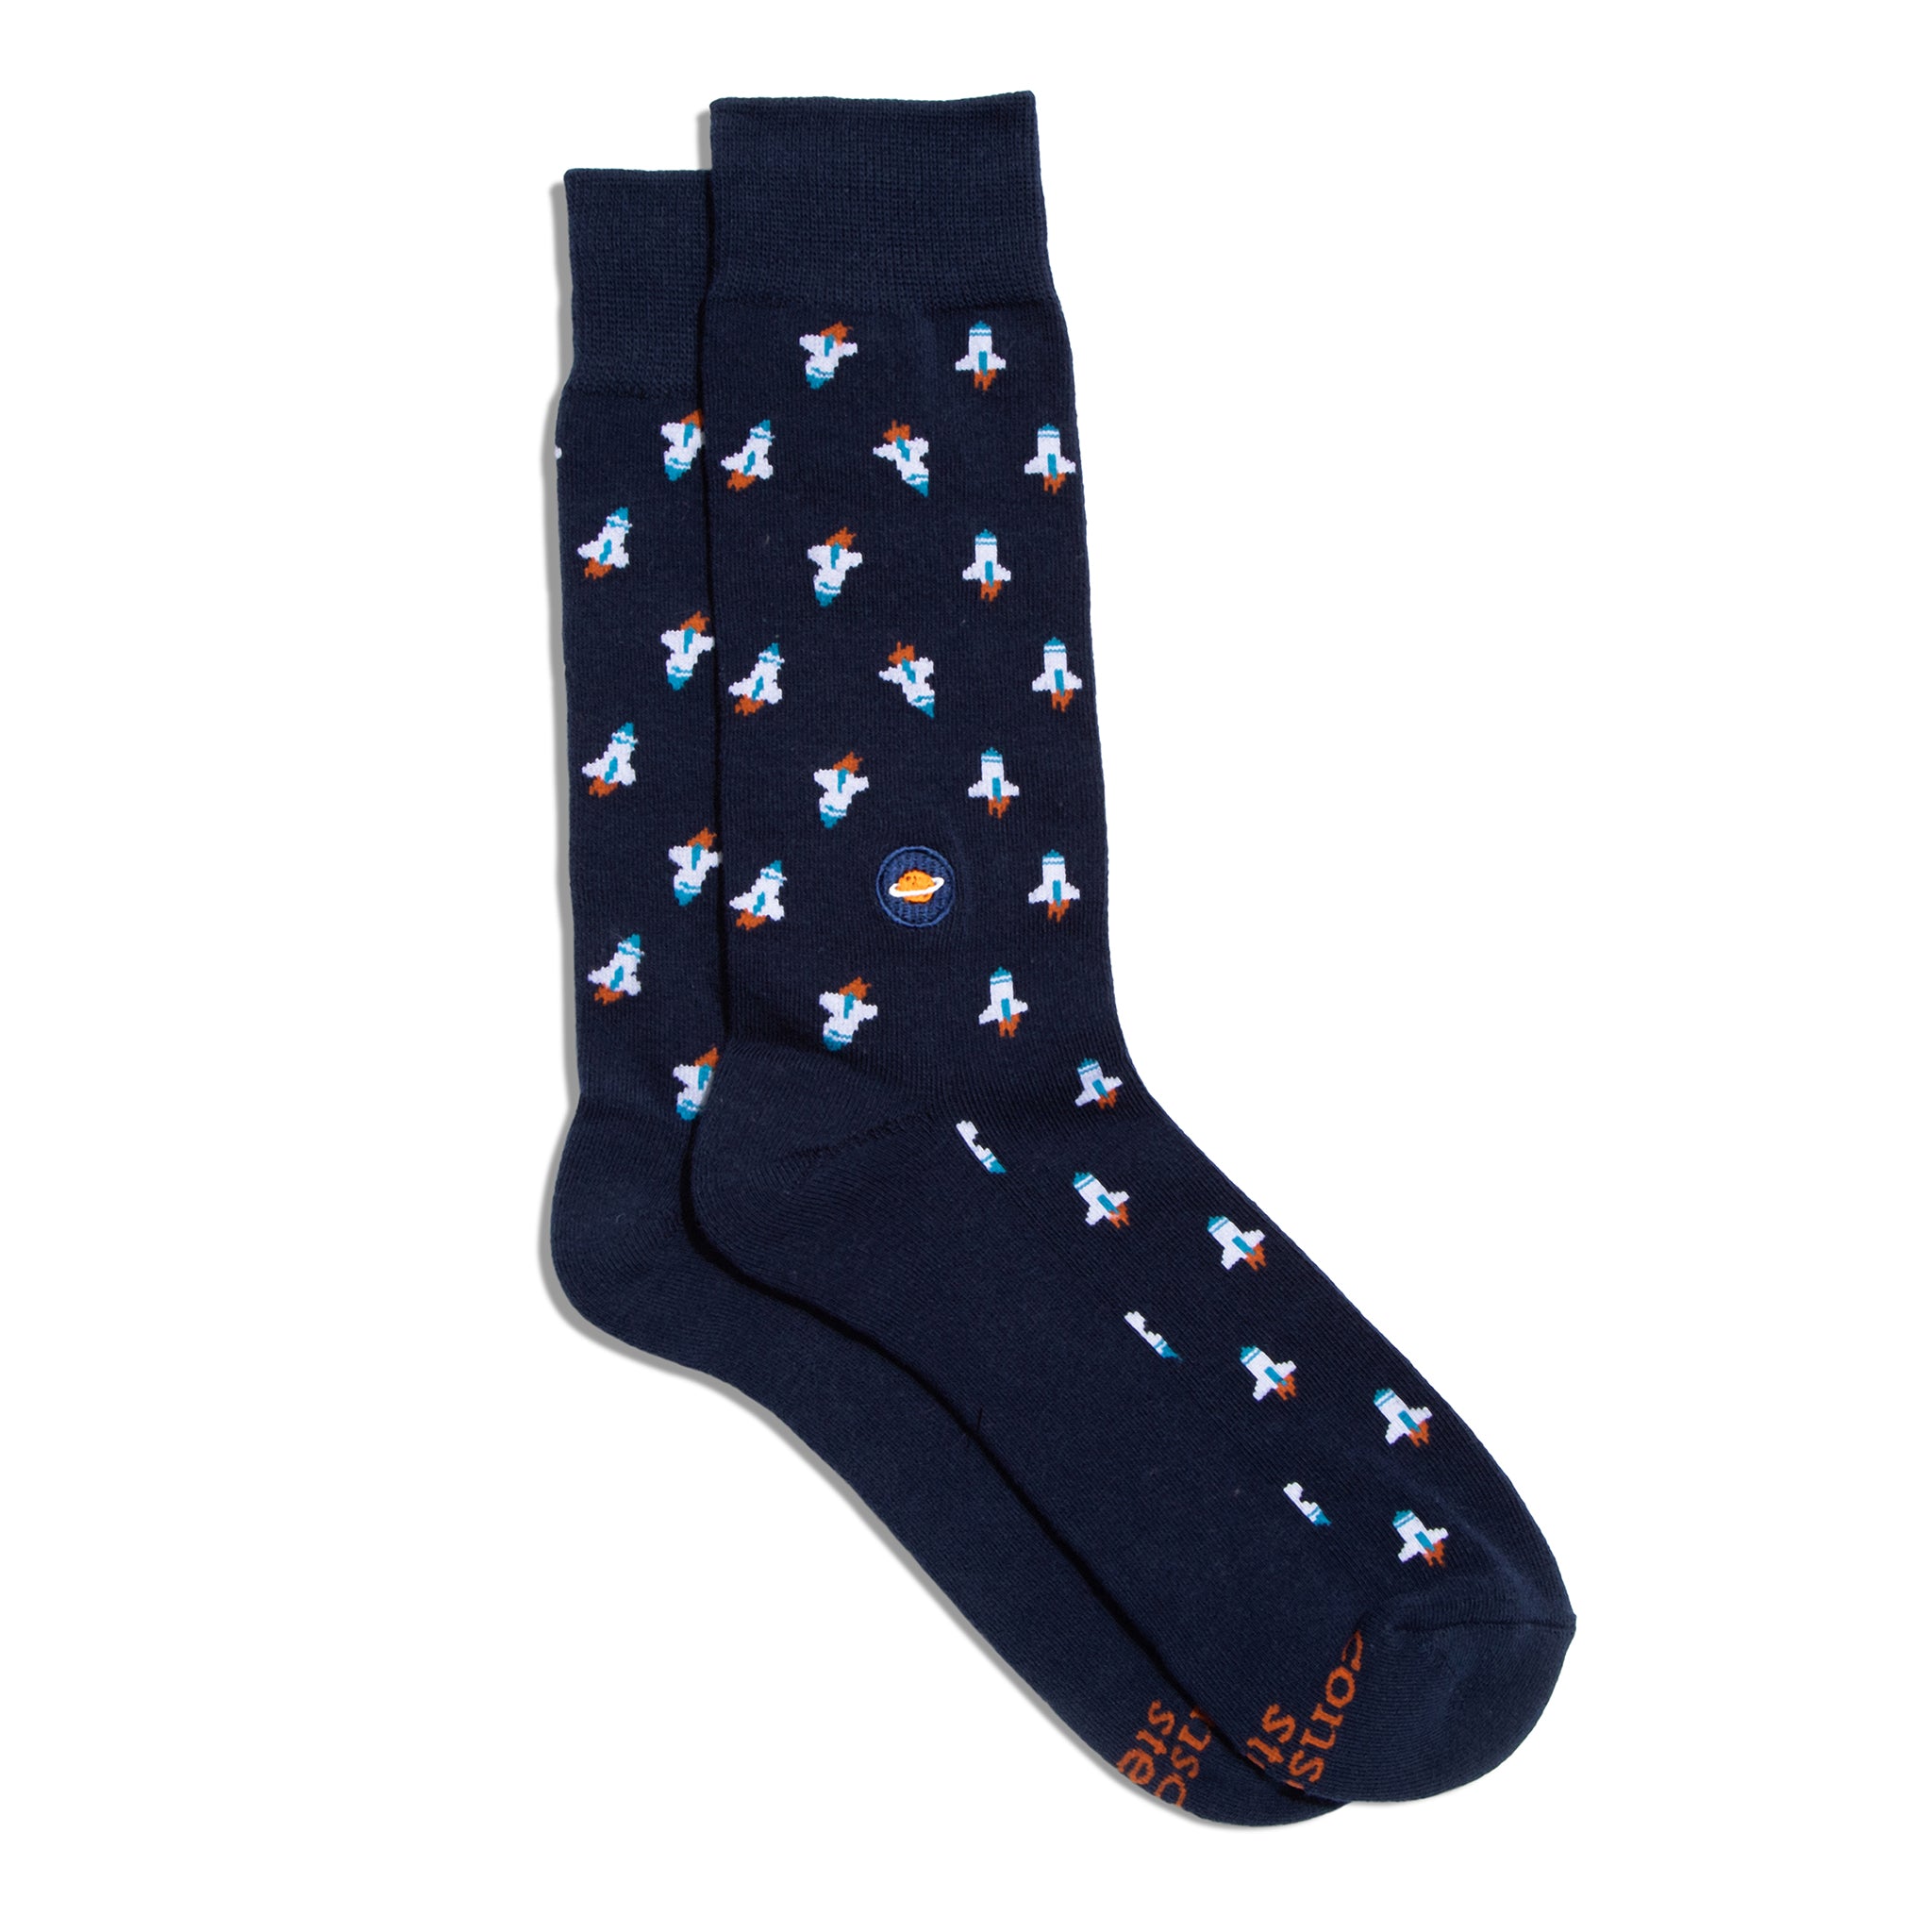 Support Space Exploration with Stylish Socks | Conscious Step